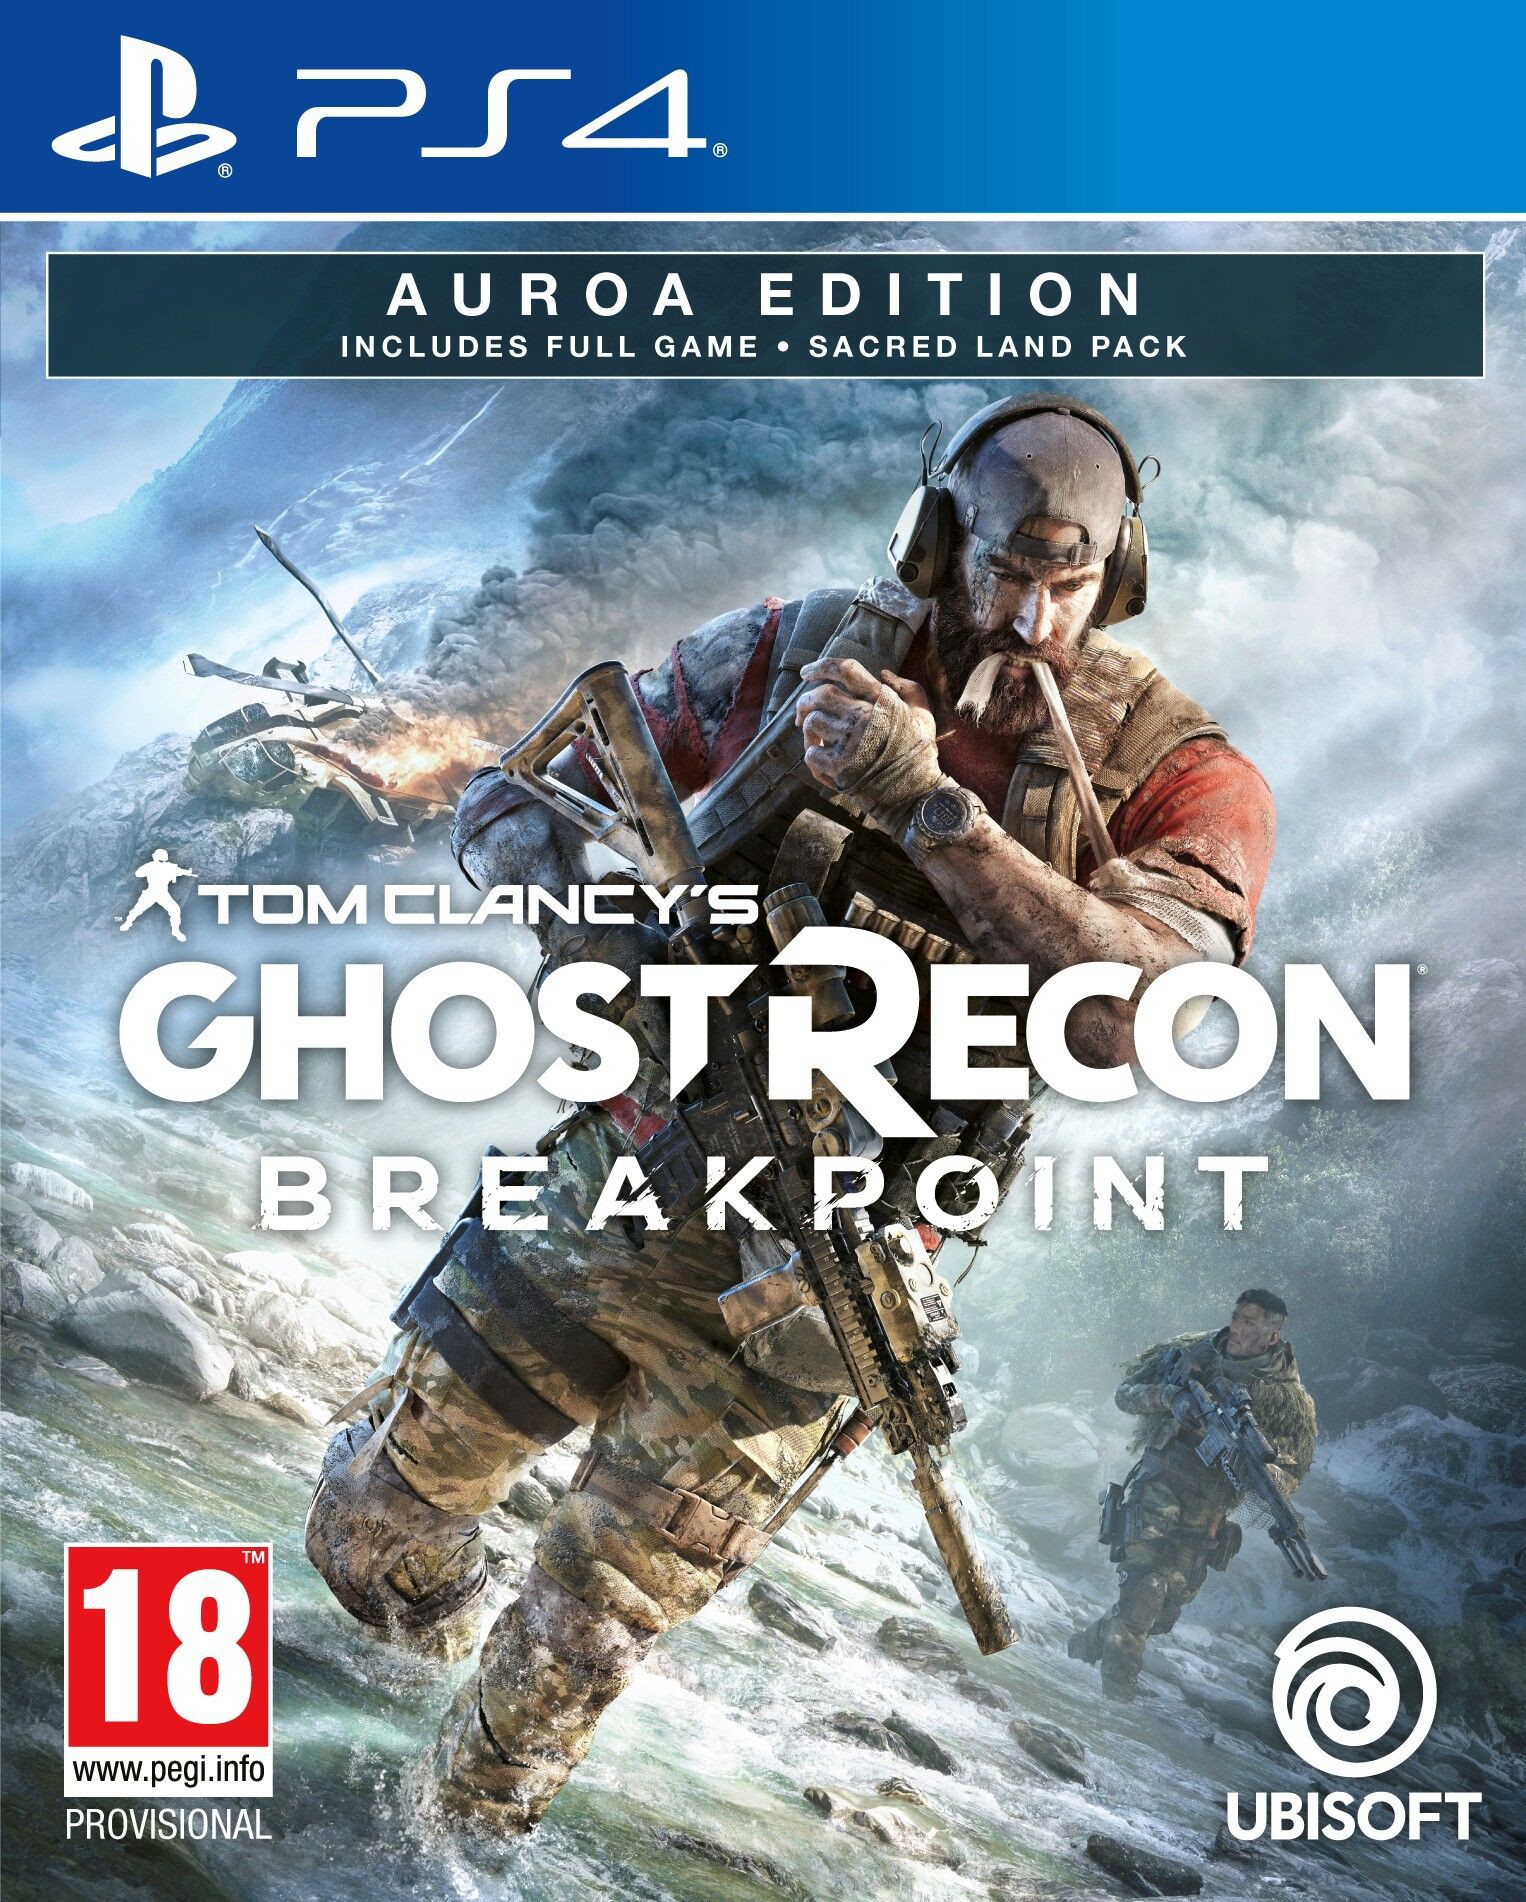 Tom Clancys Ghost Recon Breakpoint: Auroa Edition